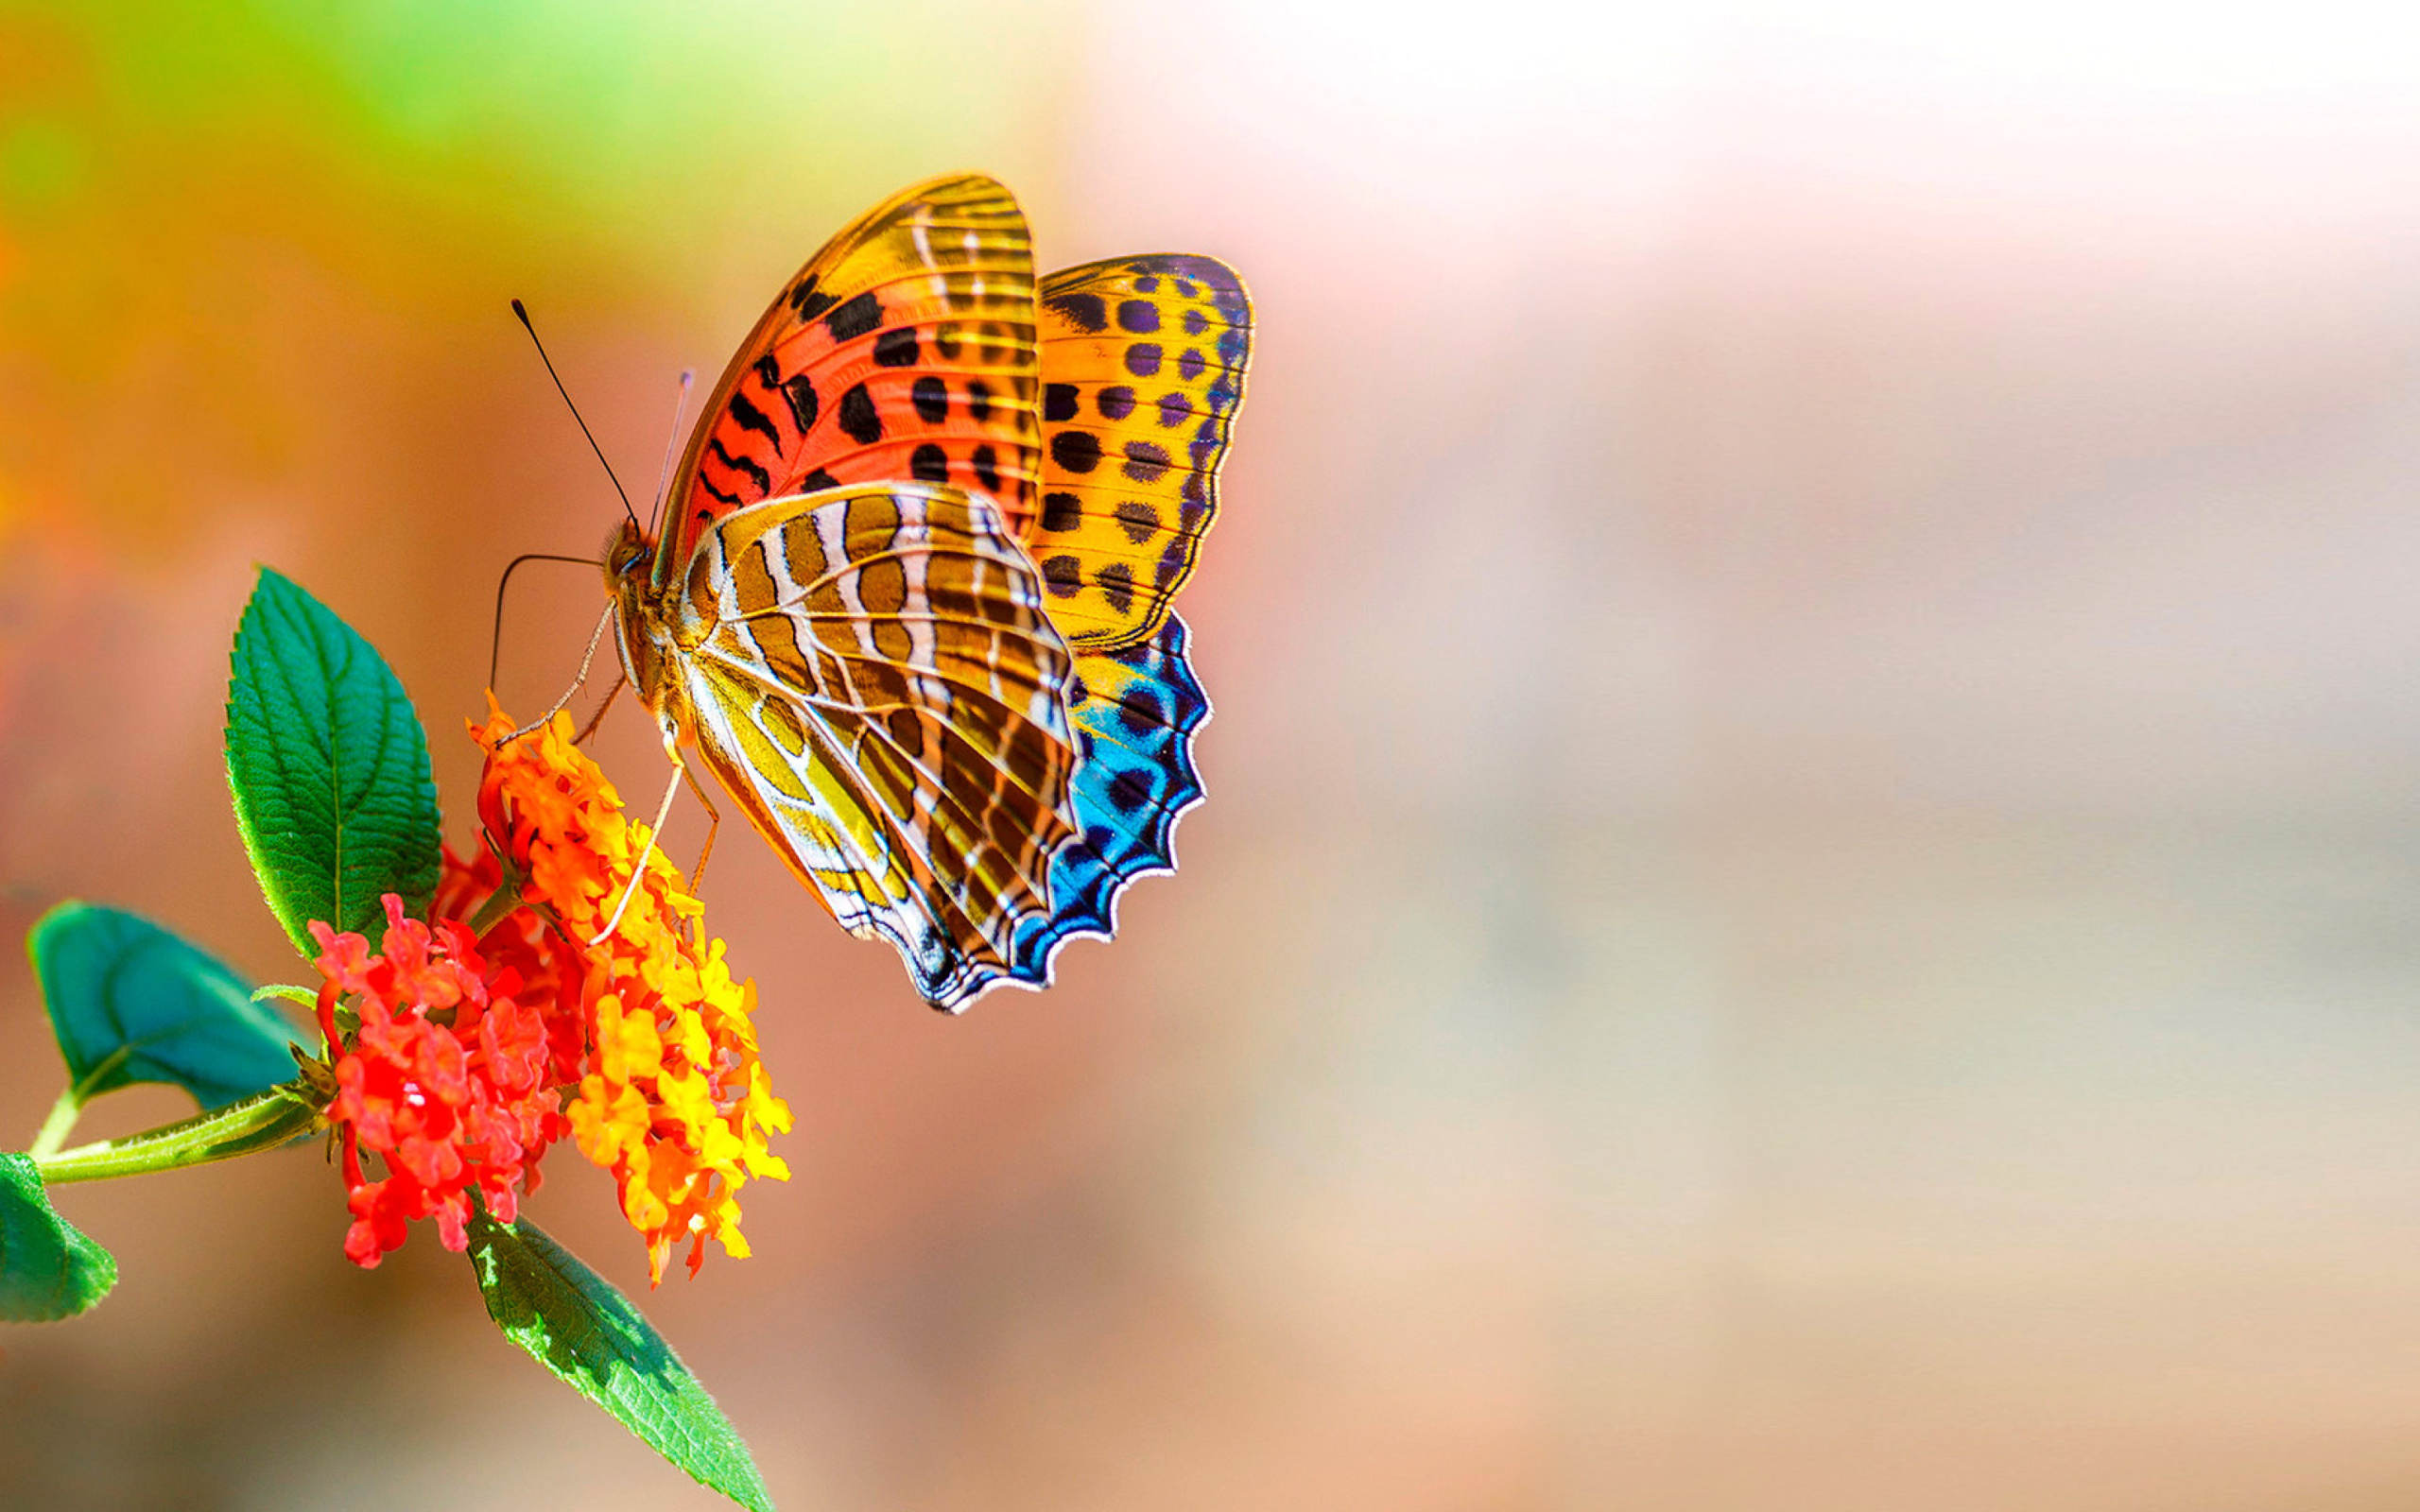 Colorful Animated Butterfly wallpaper 2560x1600